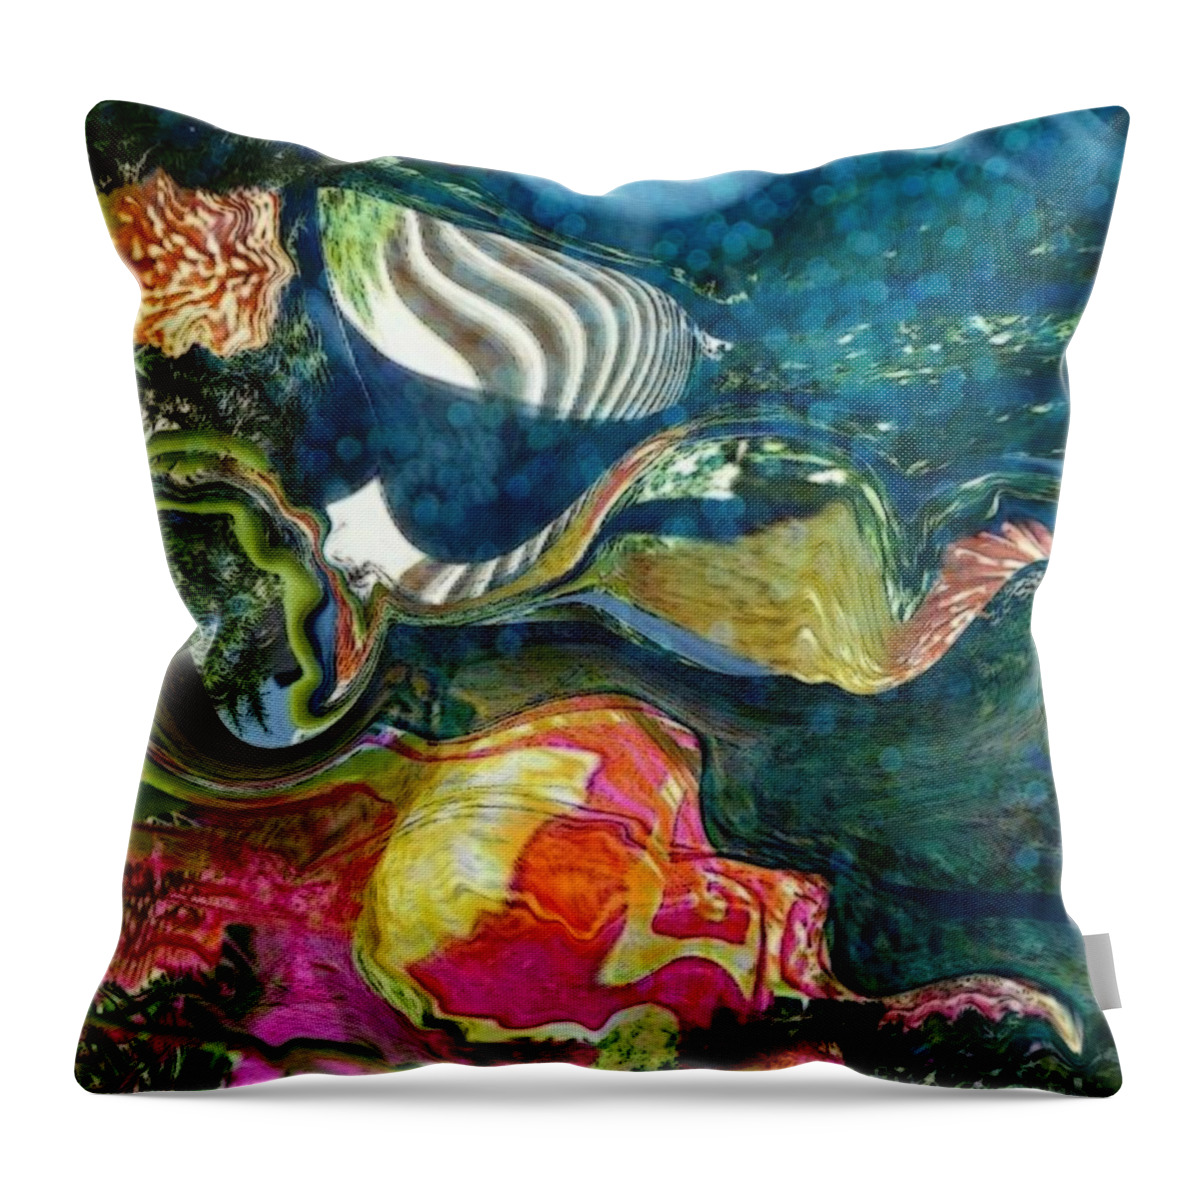 Photography Throw Pillow featuring the photograph Seascape by Kathie Chicoine